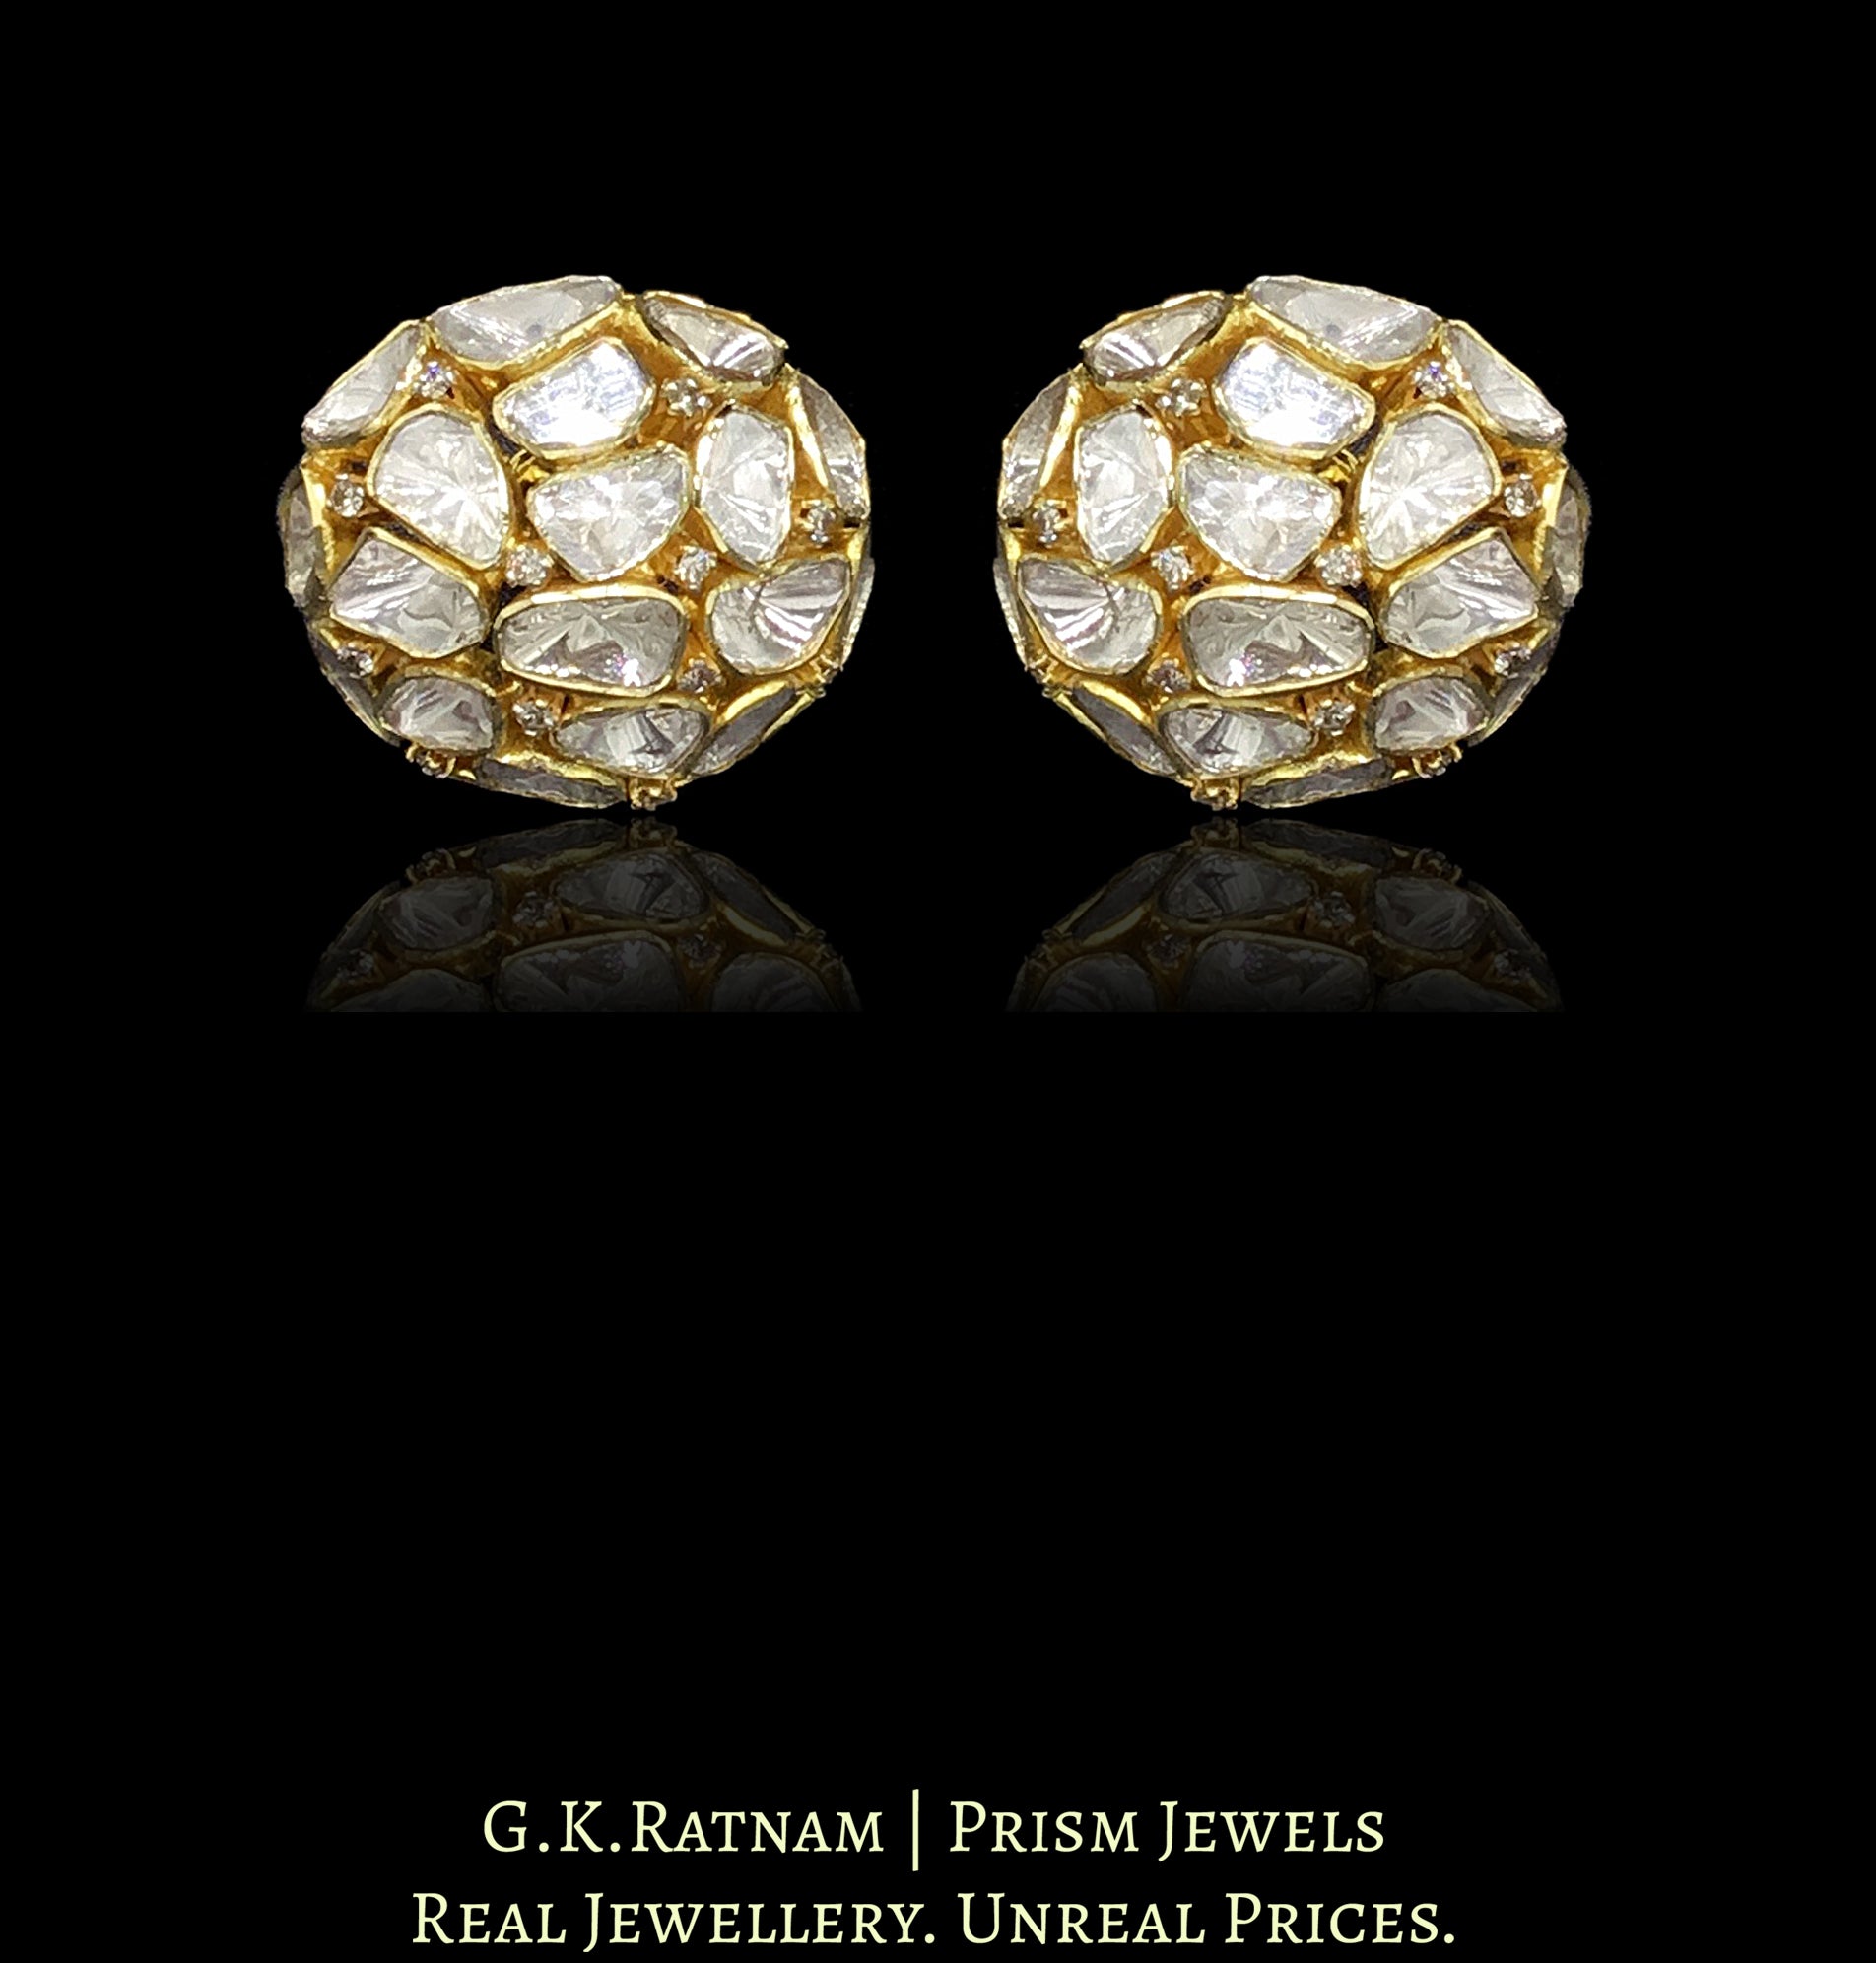 14K Gold and Diamond Polki Open Setting dome-shaped Tops / Studs Earring Pair